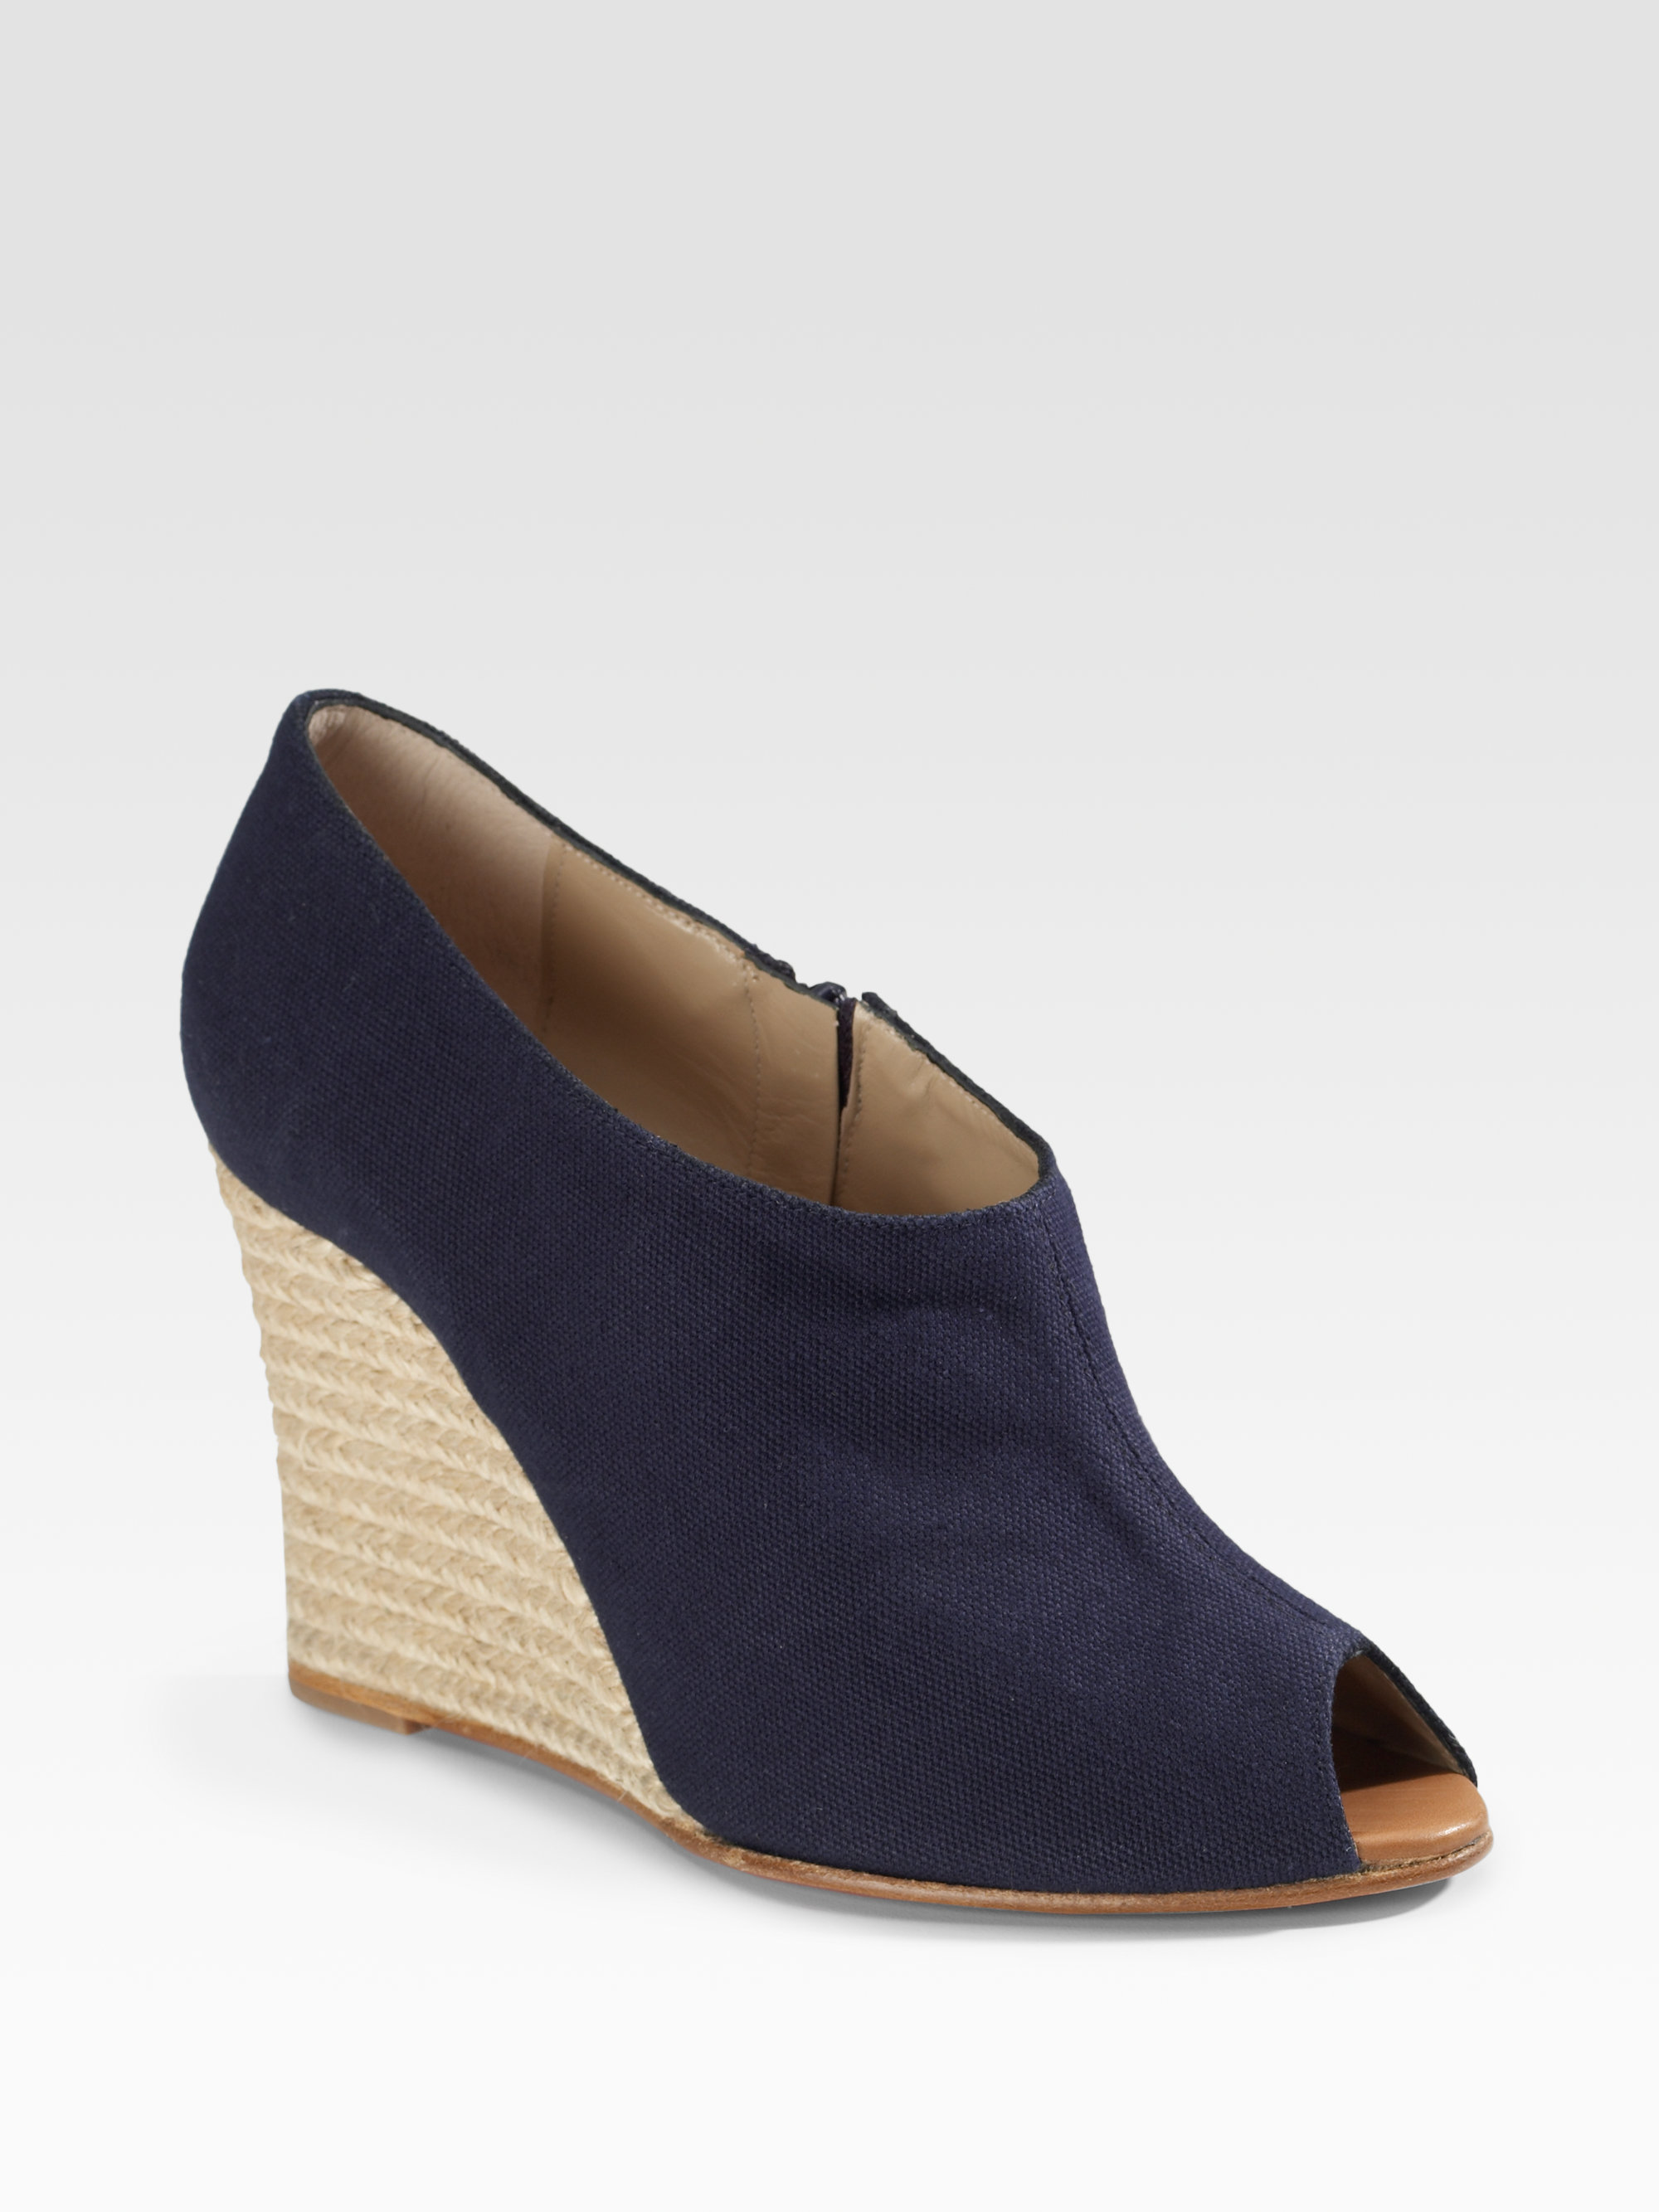 christian louboutin mens loafers - Christian louboutin Corazon Covered Wedge Espadrilles in Blue ...